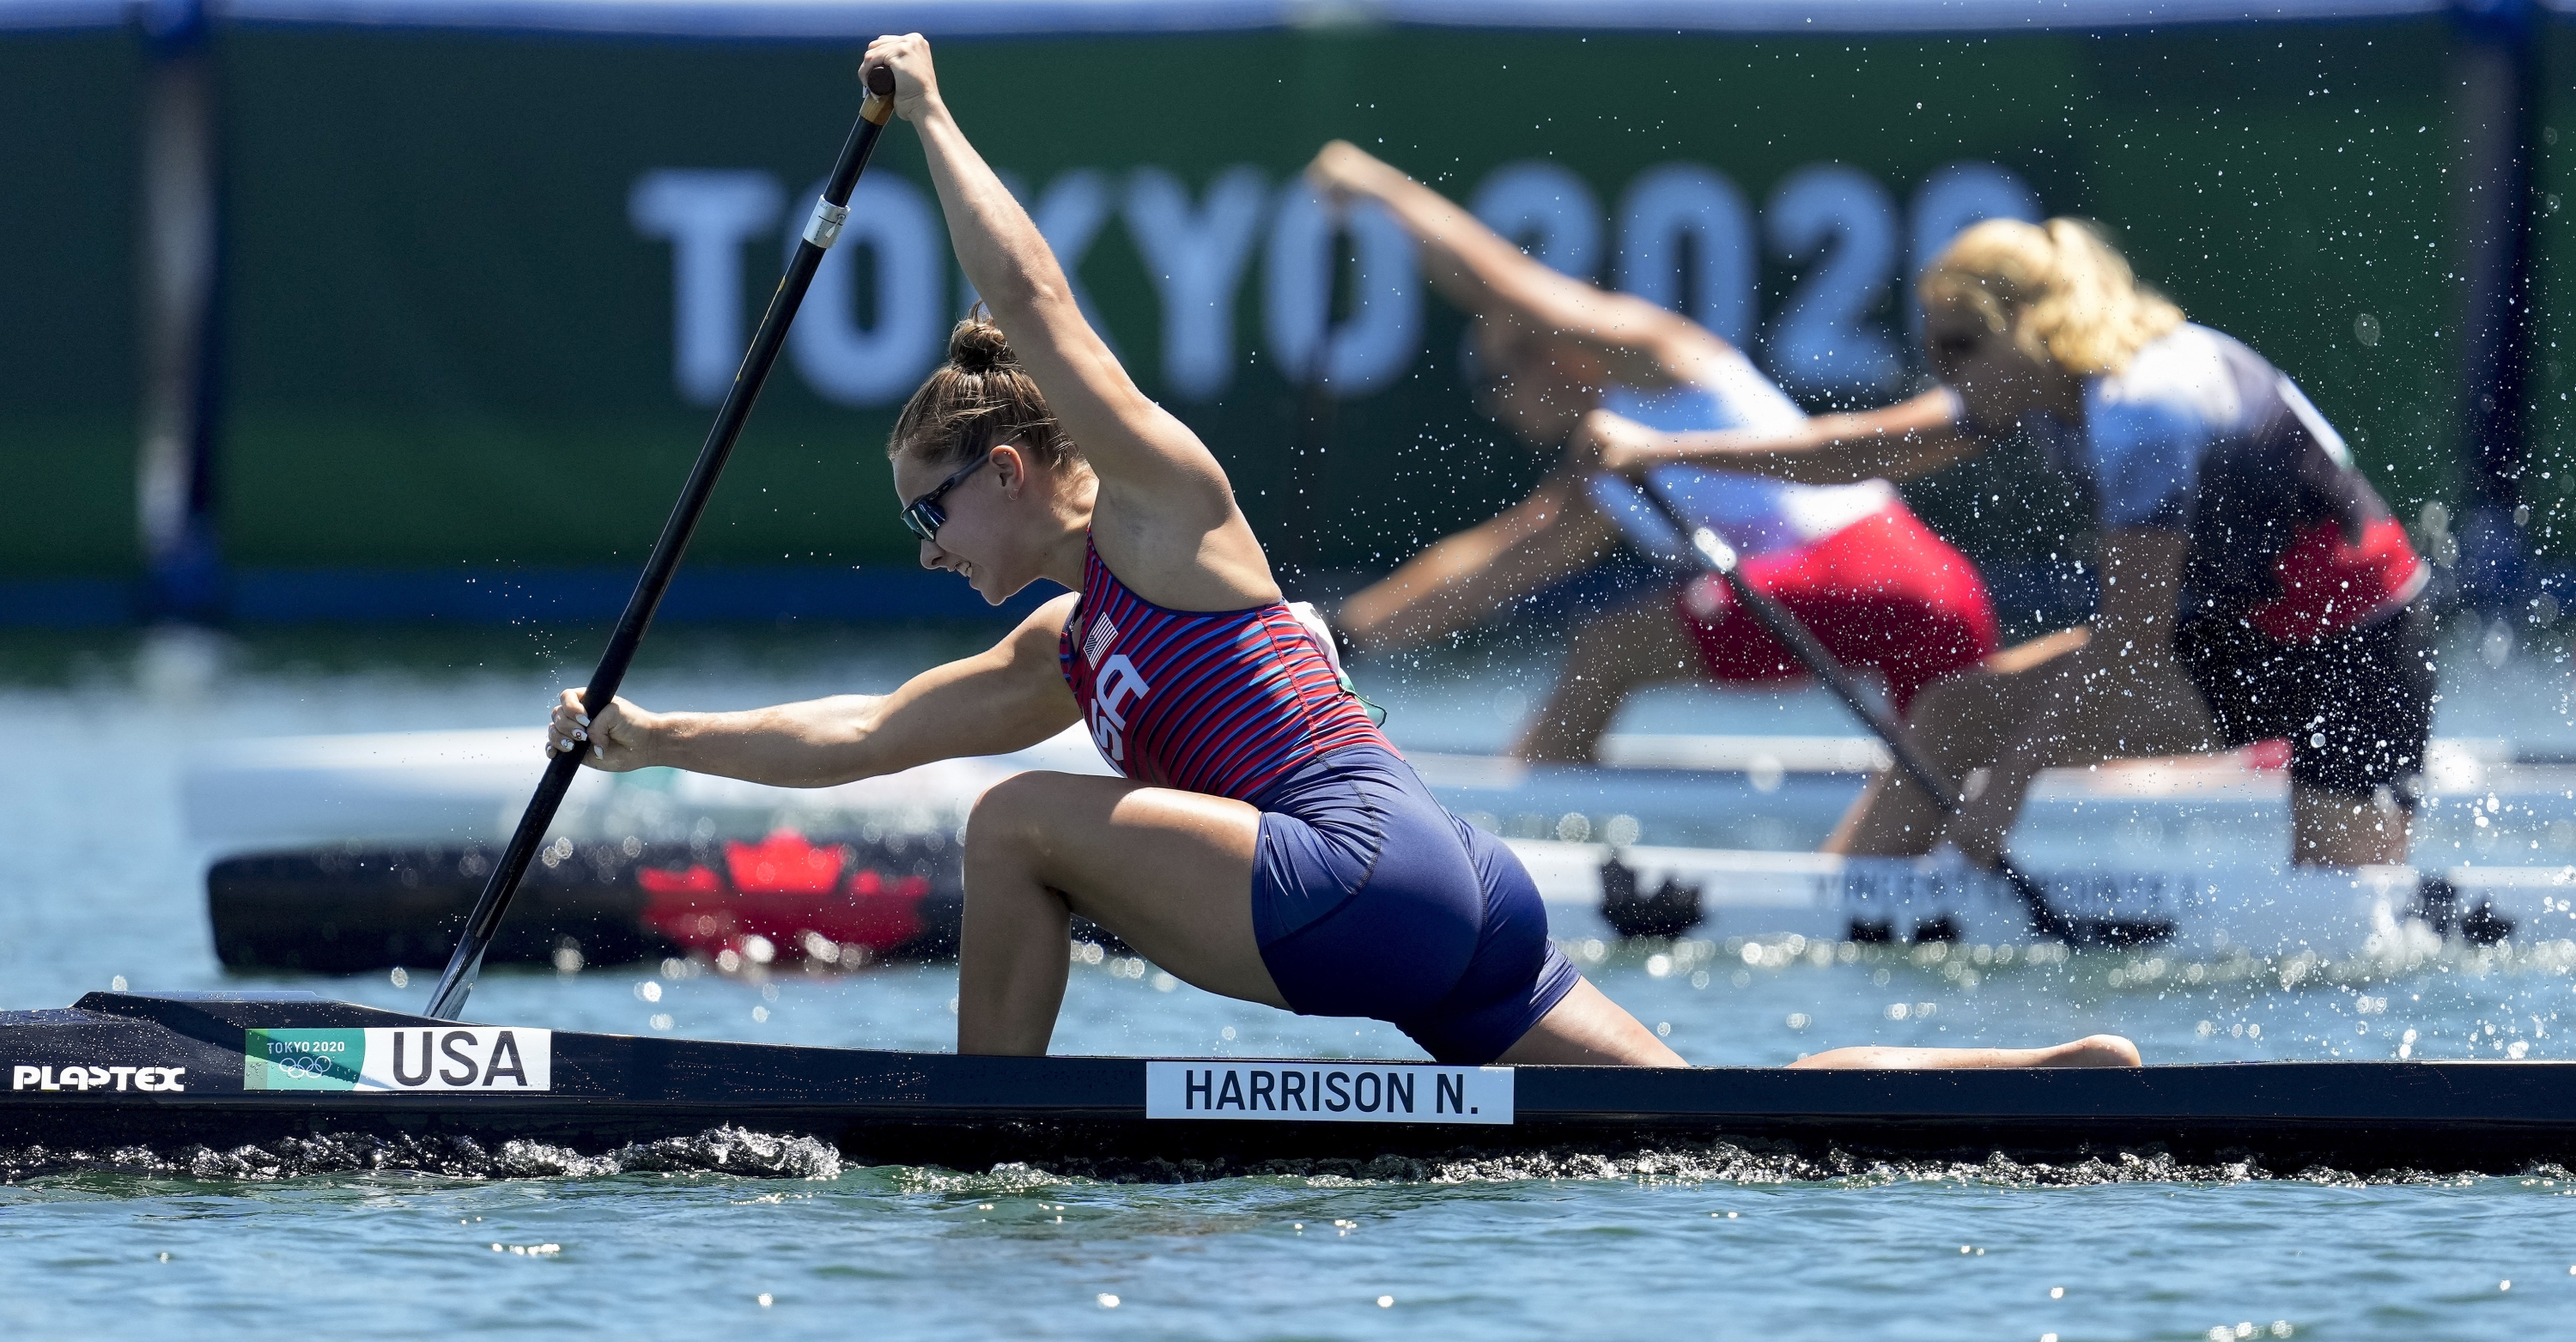 FILE - Nevin Harrison, of the United States, competes in the women's canoe single 200m final at the 2020 Summer Olympics, Thursday, Aug. 5, 2021, in Tokyo, Japan. Harrison won the C-1 200-meter race in Tokyo and is back to try again. (AP Photo/Kirsty Wigglesworth, File)